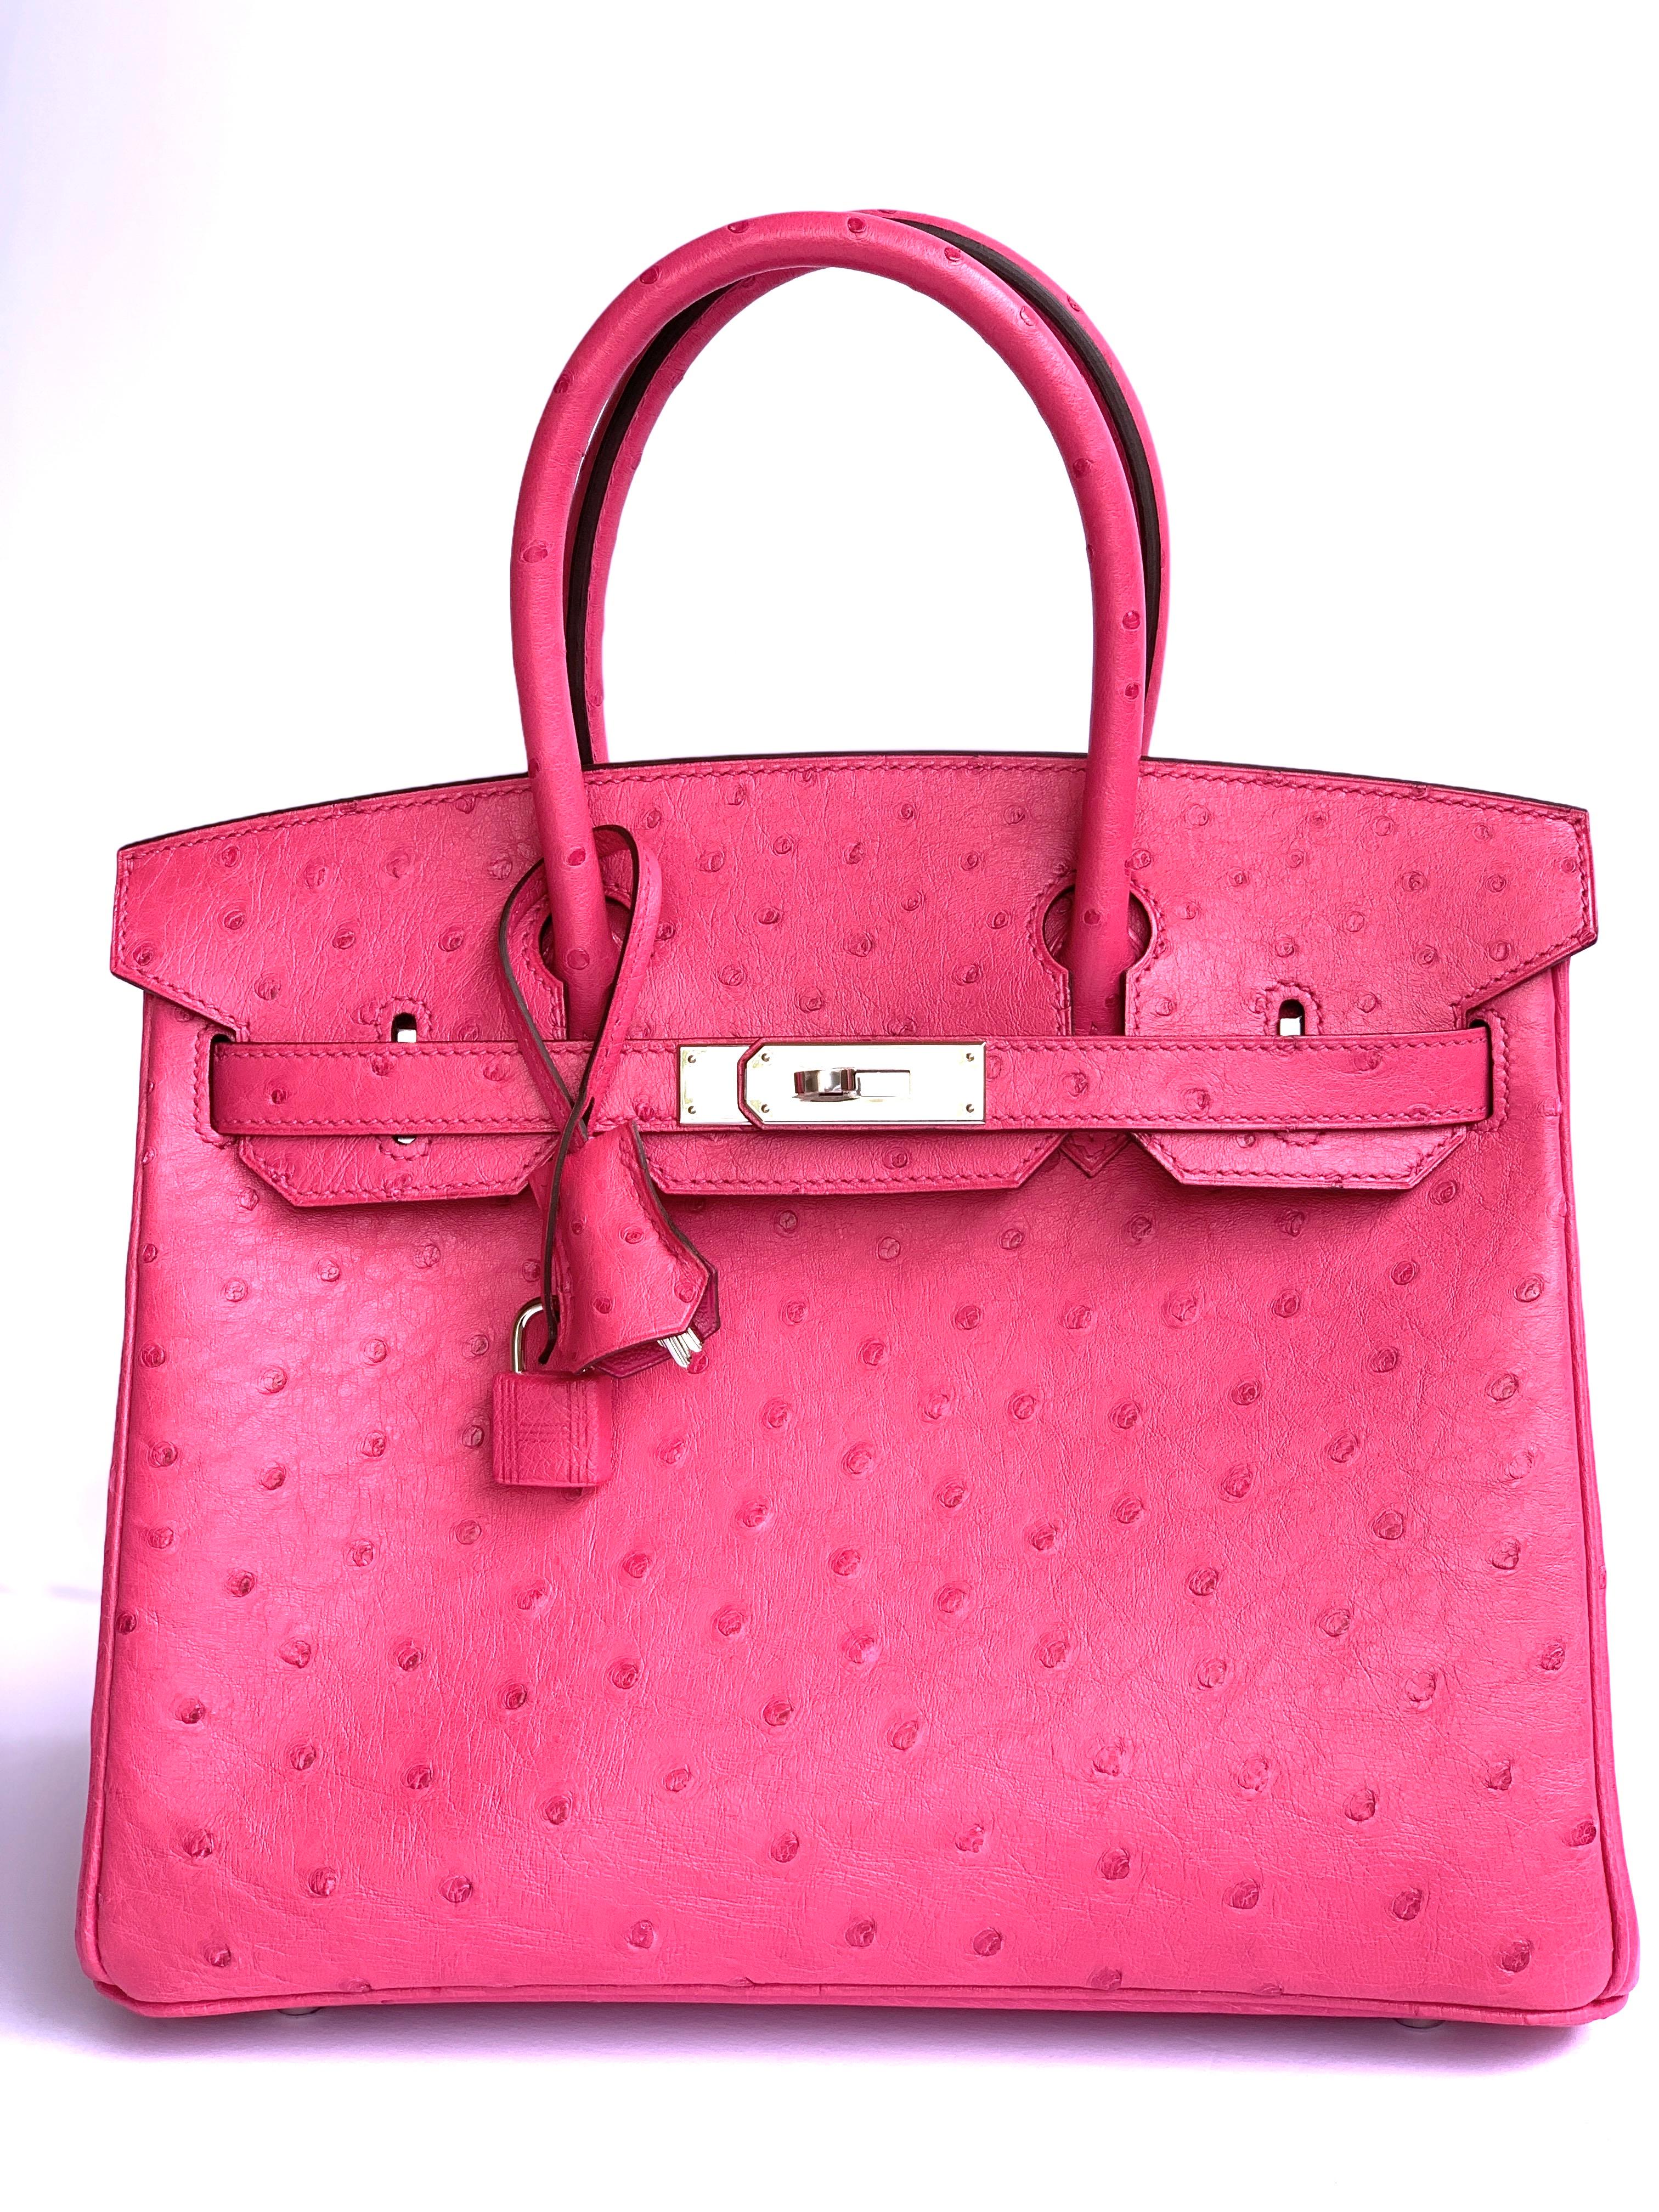 Hermes Rose Tyrien Birkin 30cm of Ostrich with palladium hardware.
Ostrich is durable and holds it shape on the Birkin, which is why collectors
love it so much.
If you like pink , this is one of Hermes best selling pinks of all time, Rose